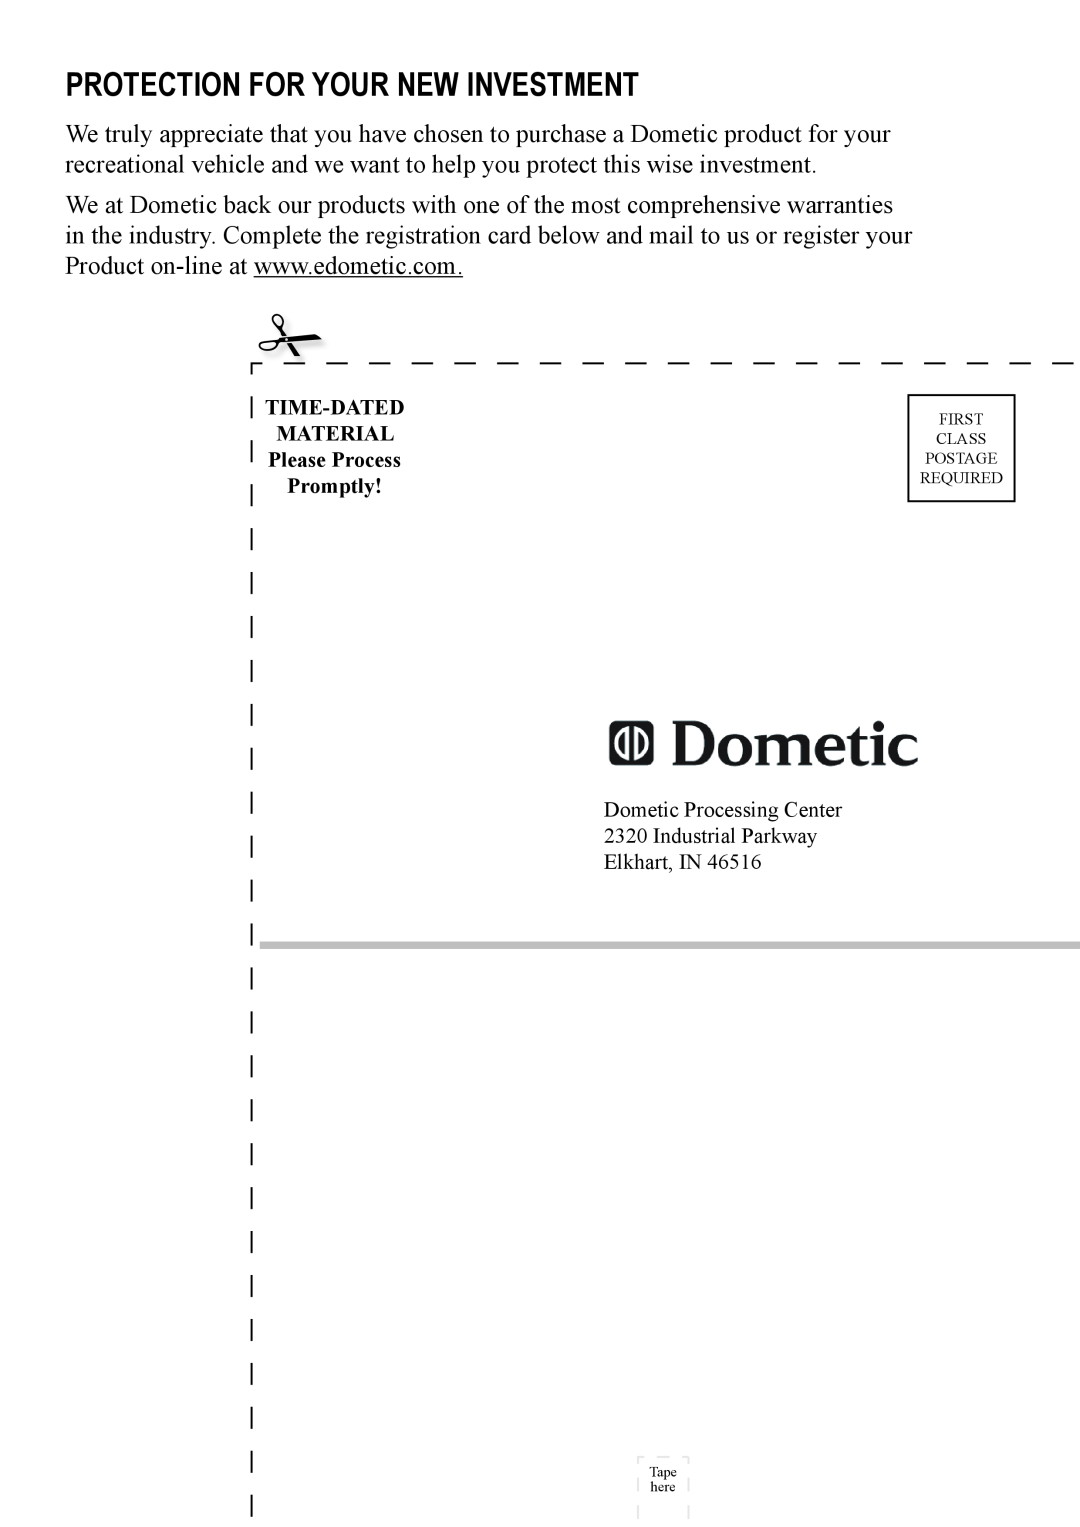 Dometic DM2862 manual Protection for Your New Investment, TIME-DATED MATERIAL Please Process Promptly 